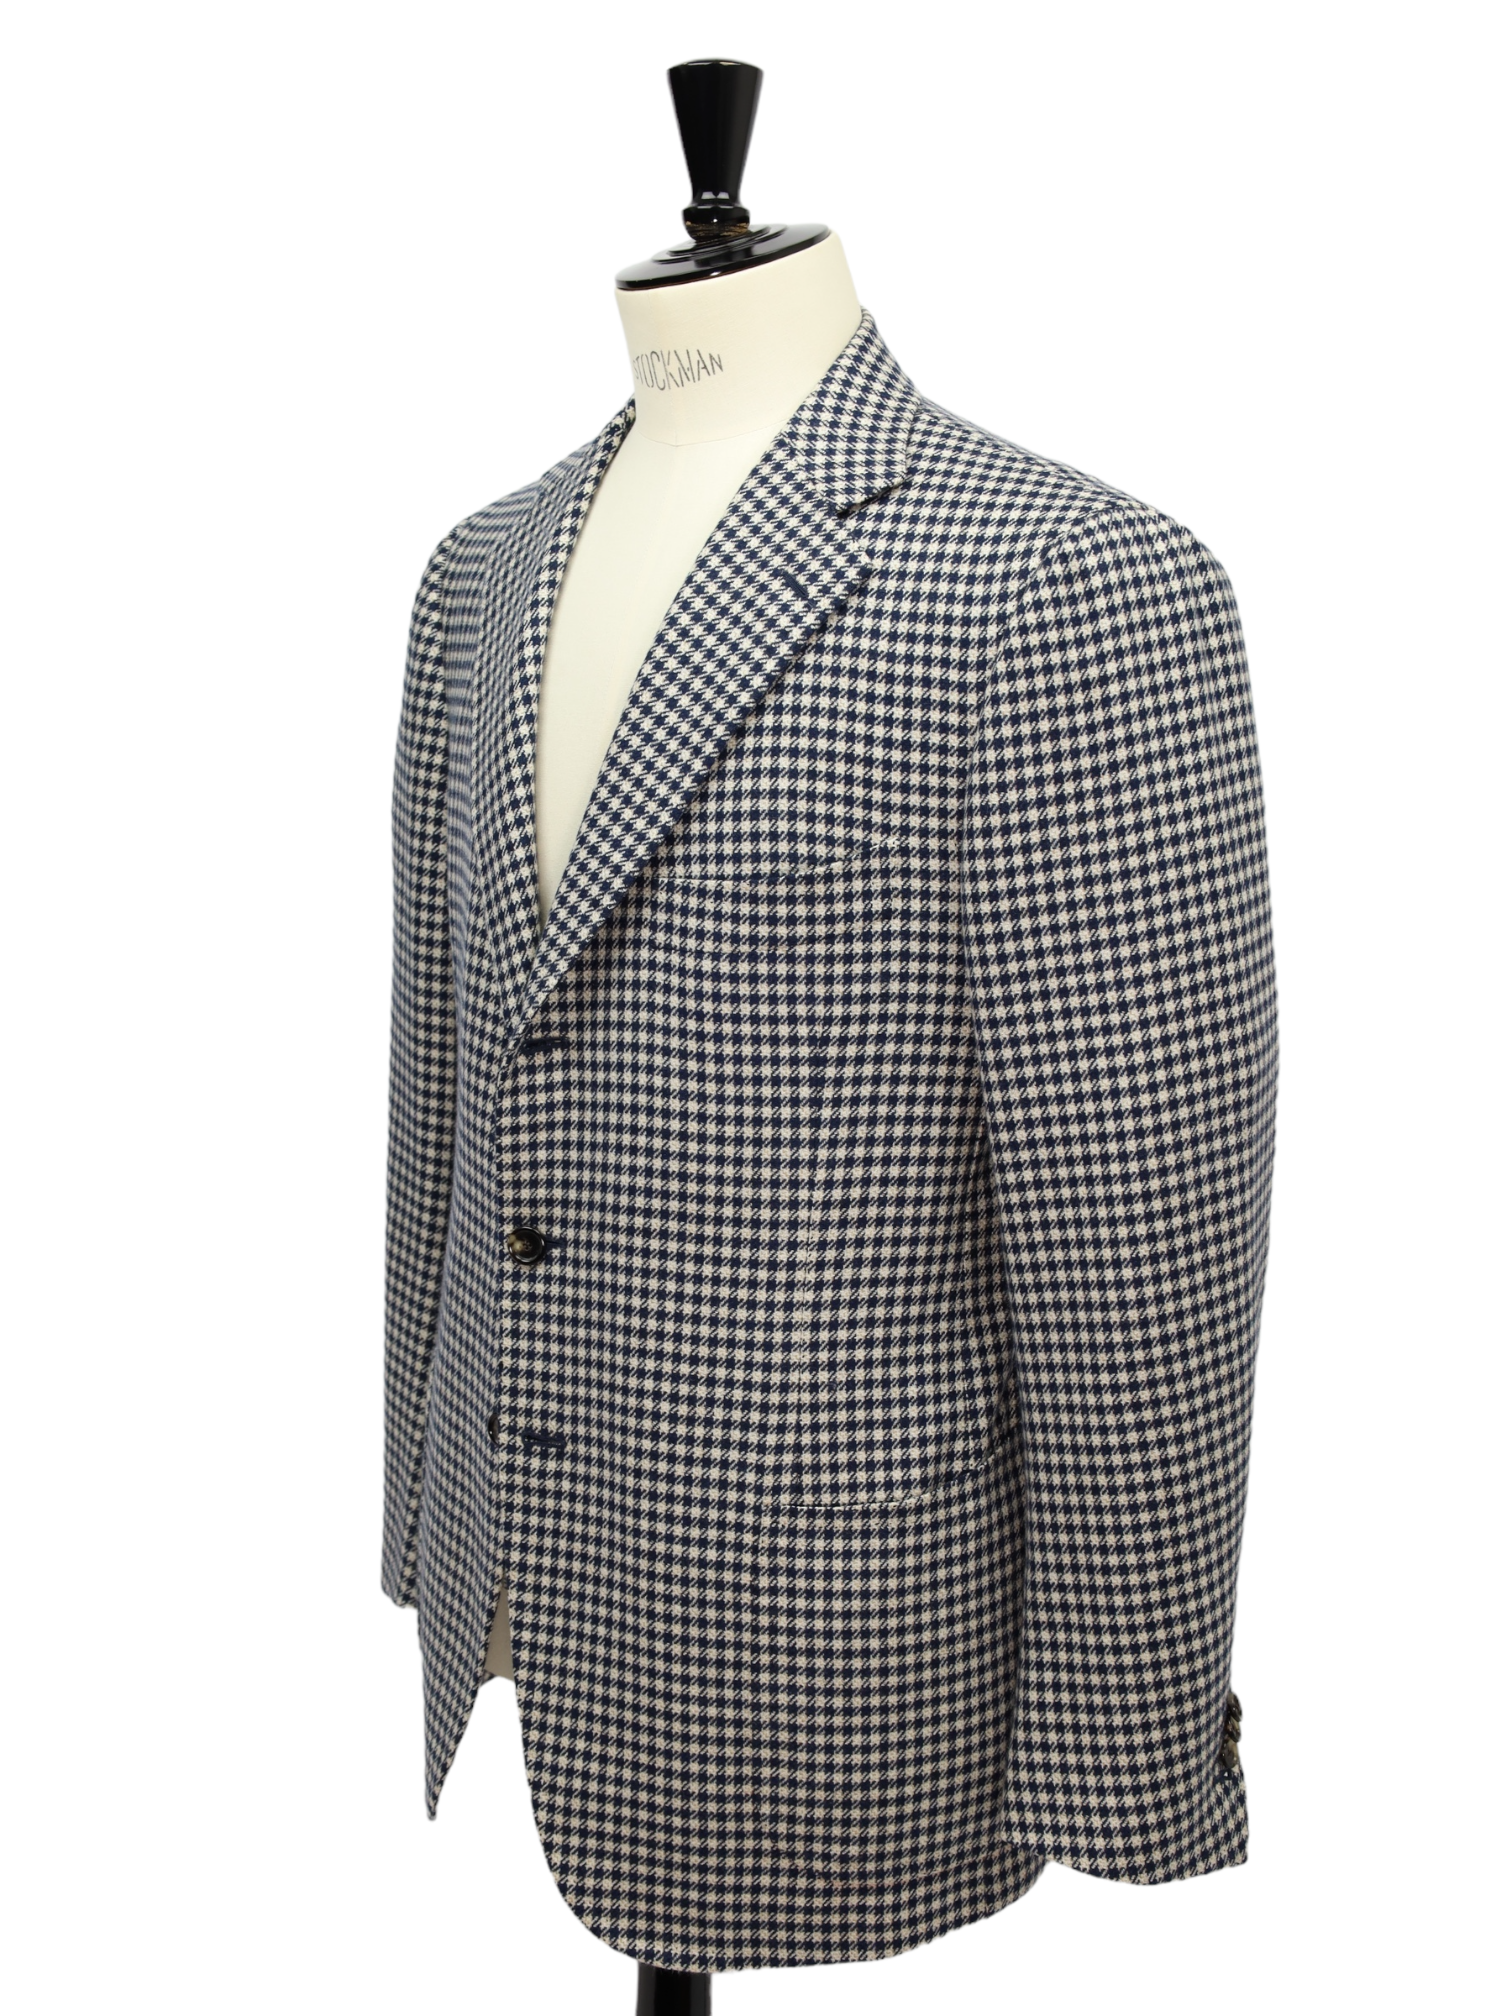 Cesare Attolini Light Brown and Navy Houndstooth Cashmere Jacket